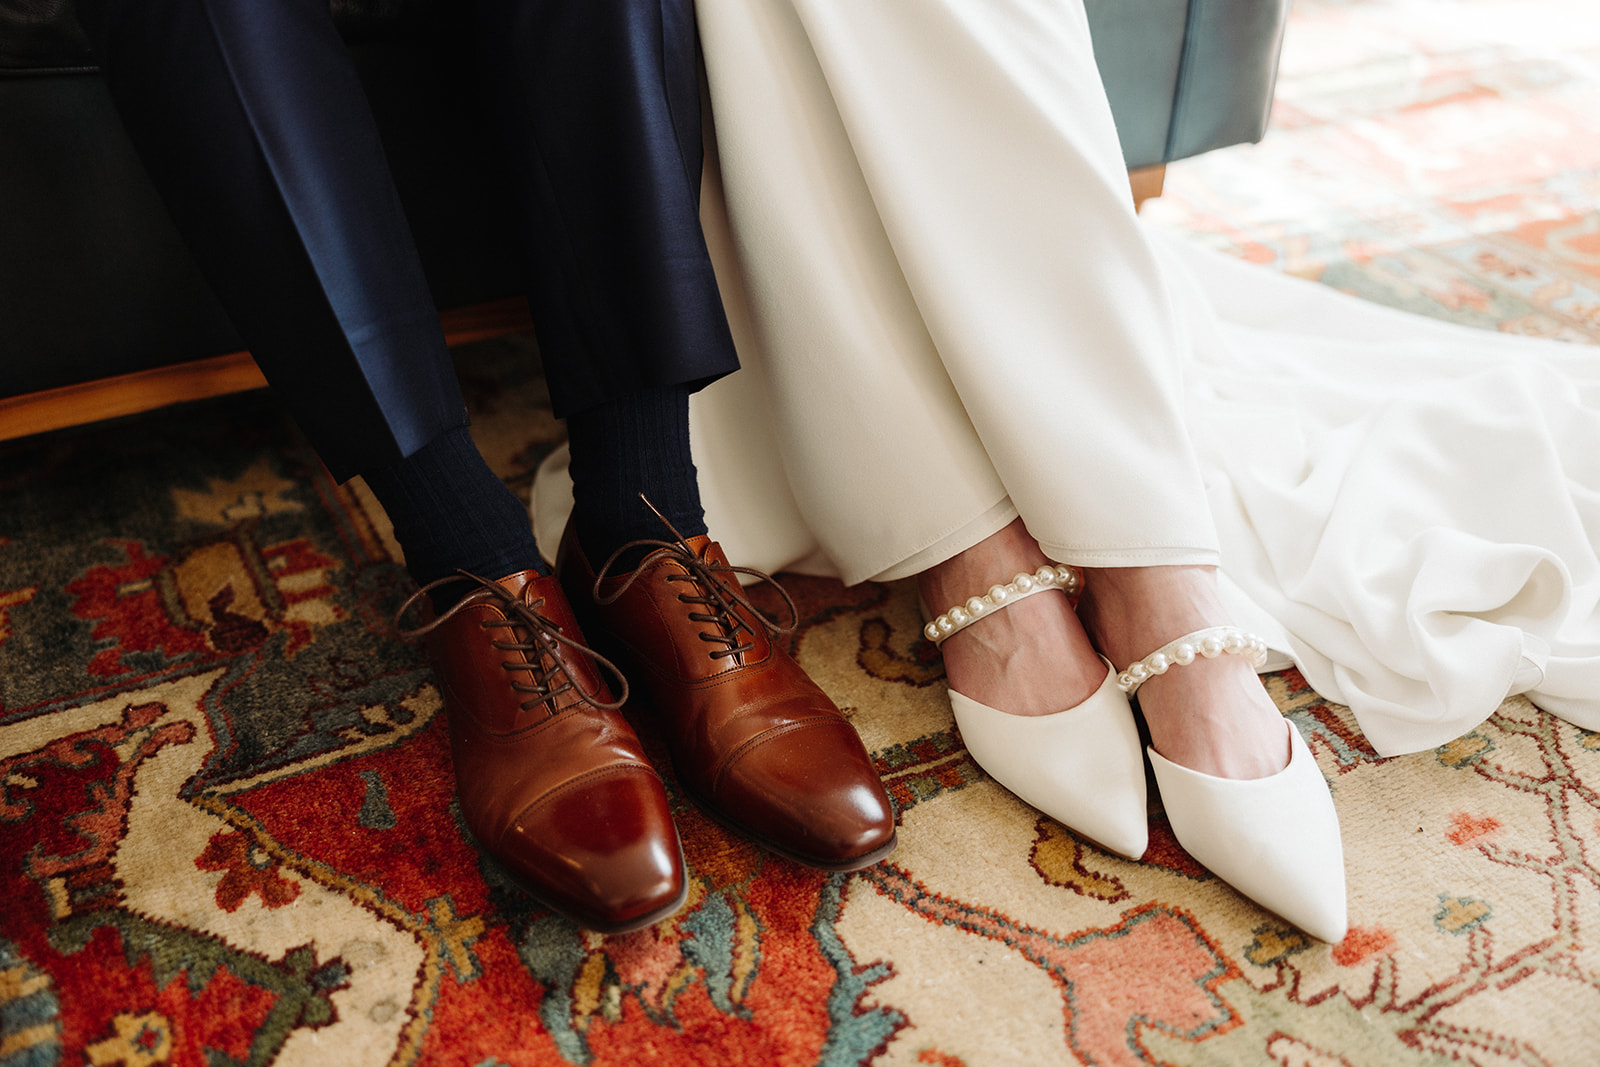 close up to the Bride and groom's shoes